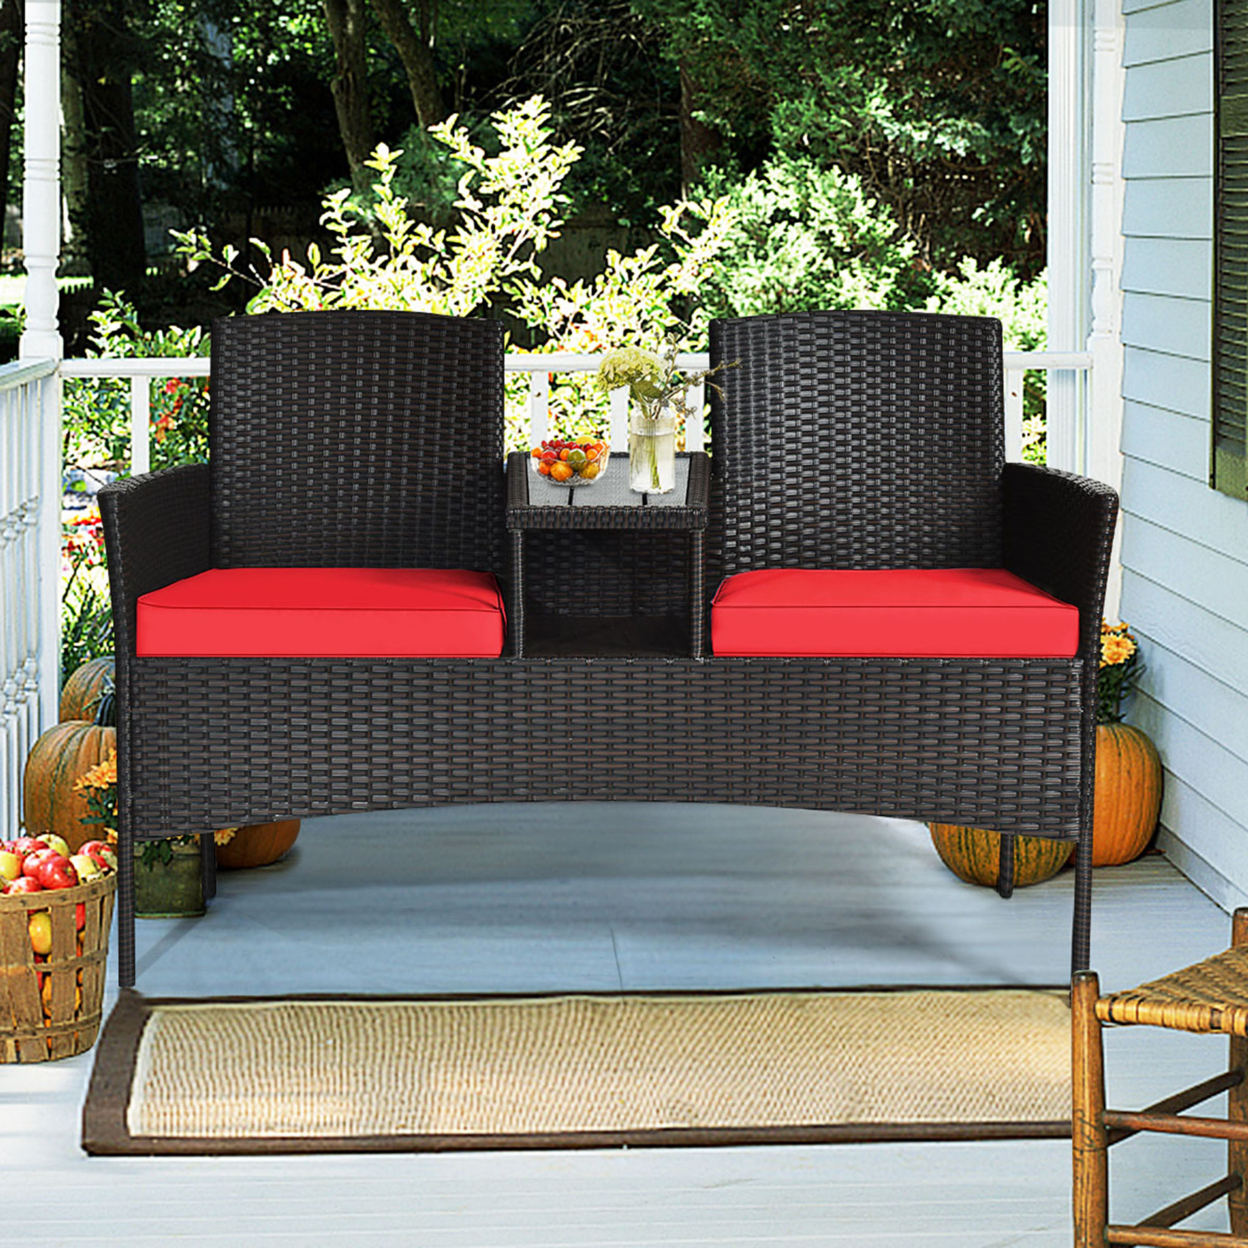 Gymax Rattan Wicker Patio Conversation Set W/ Loveseat Table Red Cushion